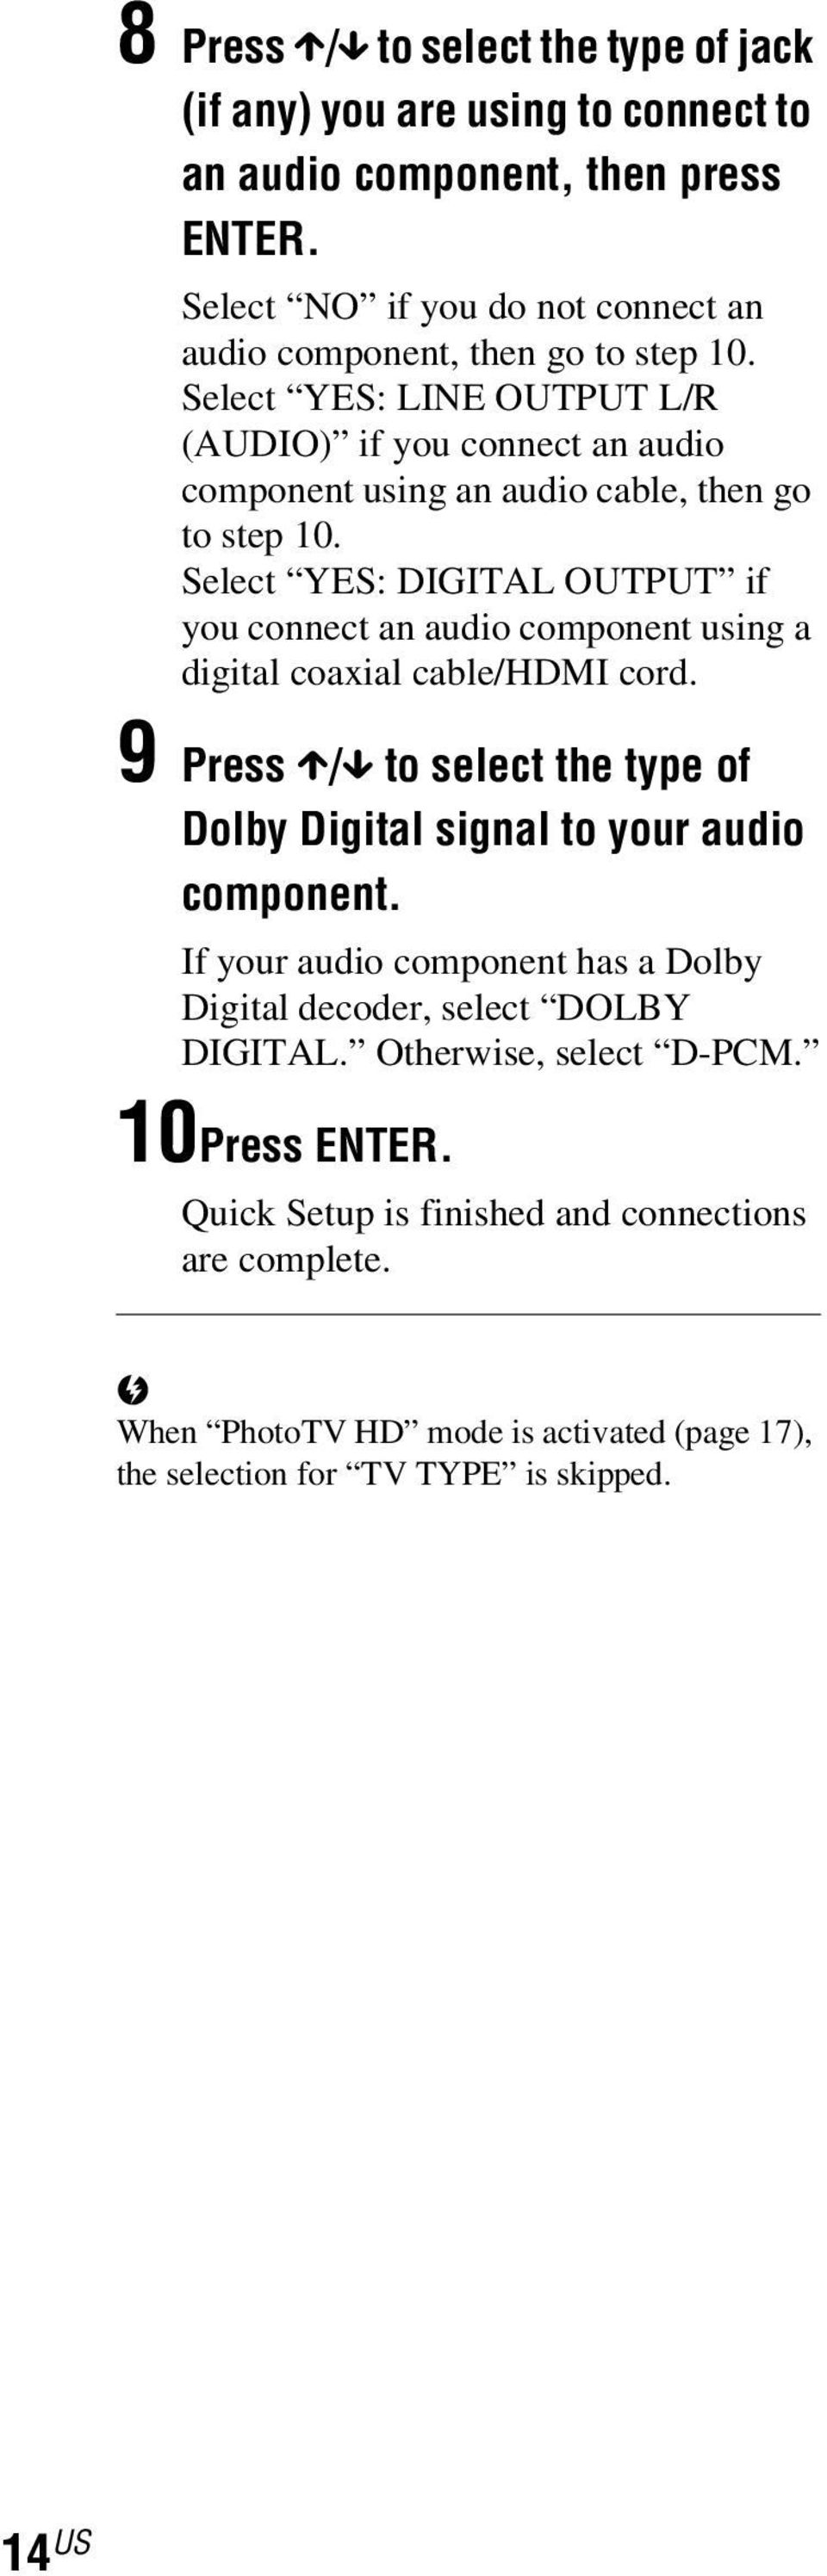 Select YES: DIGITAL OUTPUT if you connect an audio component using a digital coaxial cale/hdmi cord. 9 Press X/x to select the type of Doly Digital signal to your audio component.